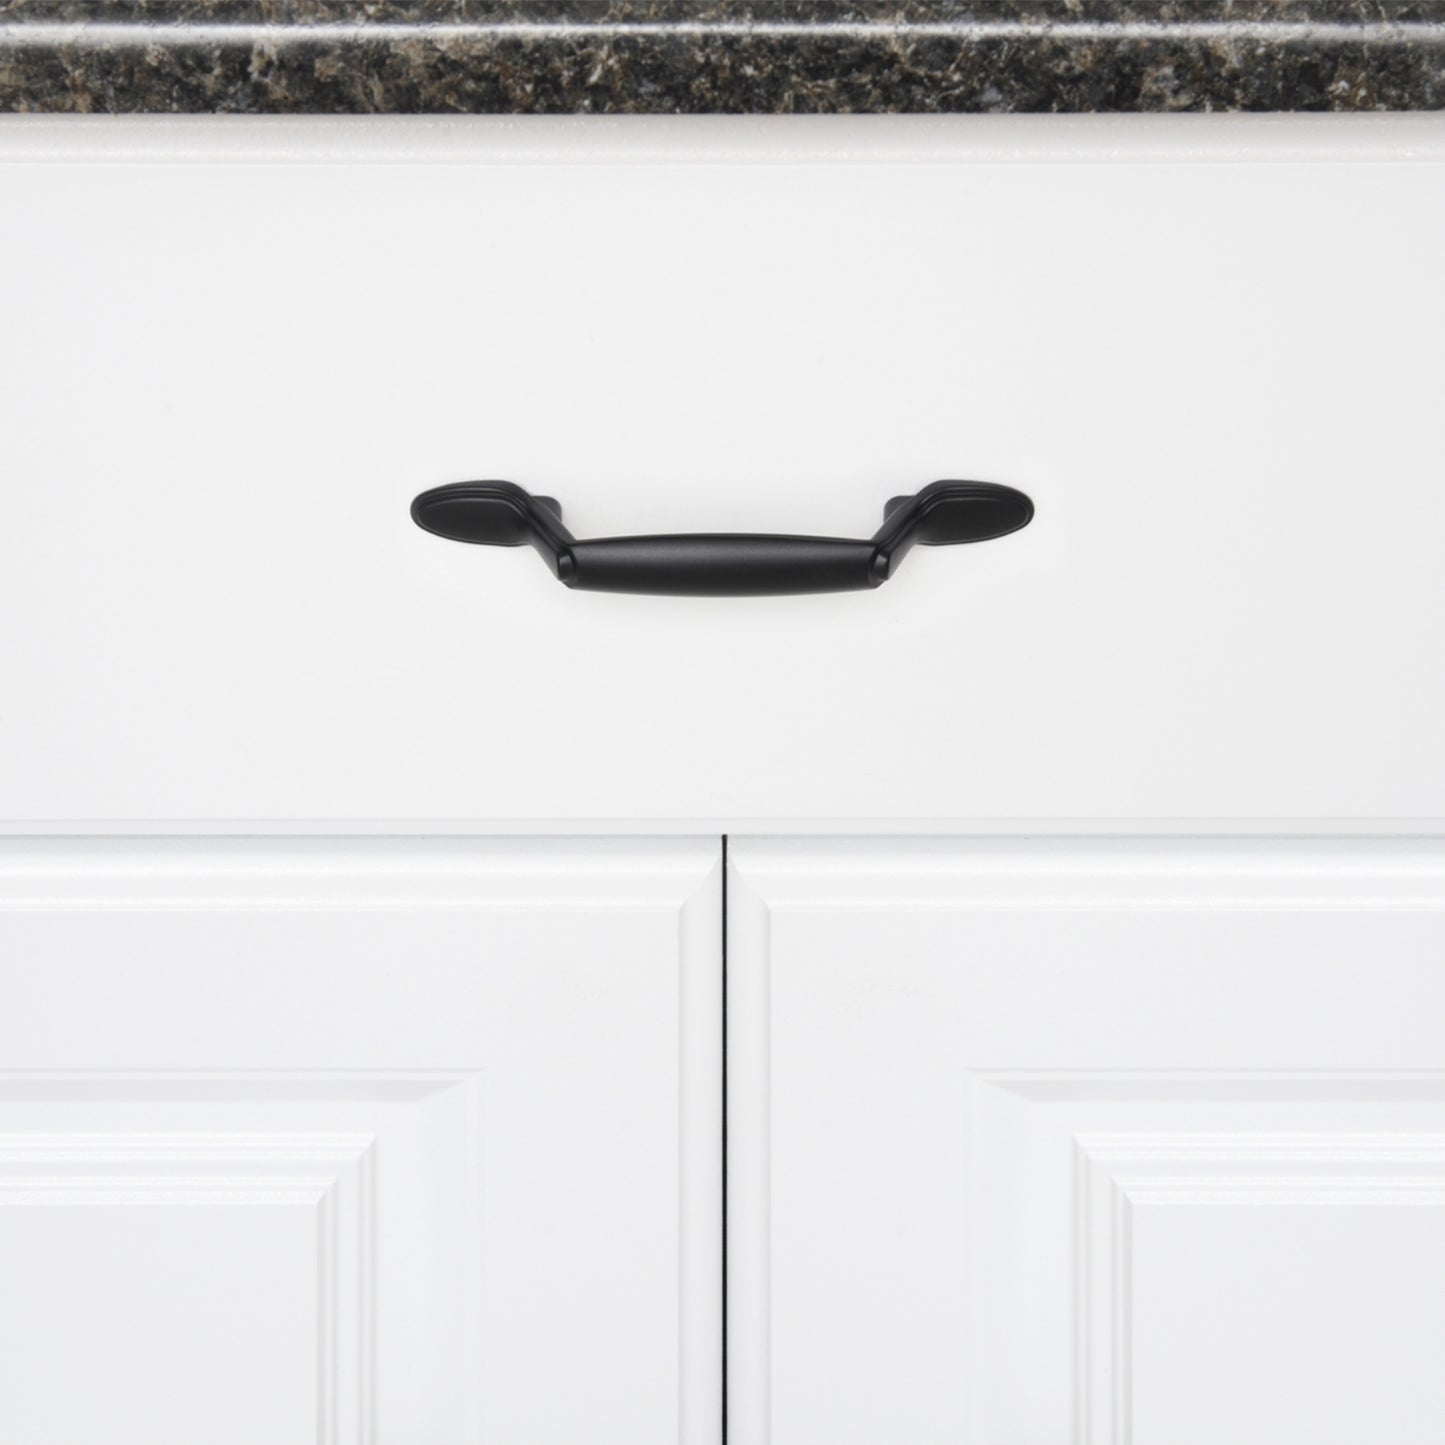 South Main Hardware Spoon Foot Cabinet Handle, 5.12" Length (3" Hole Center), Flat Black, 10-Pack